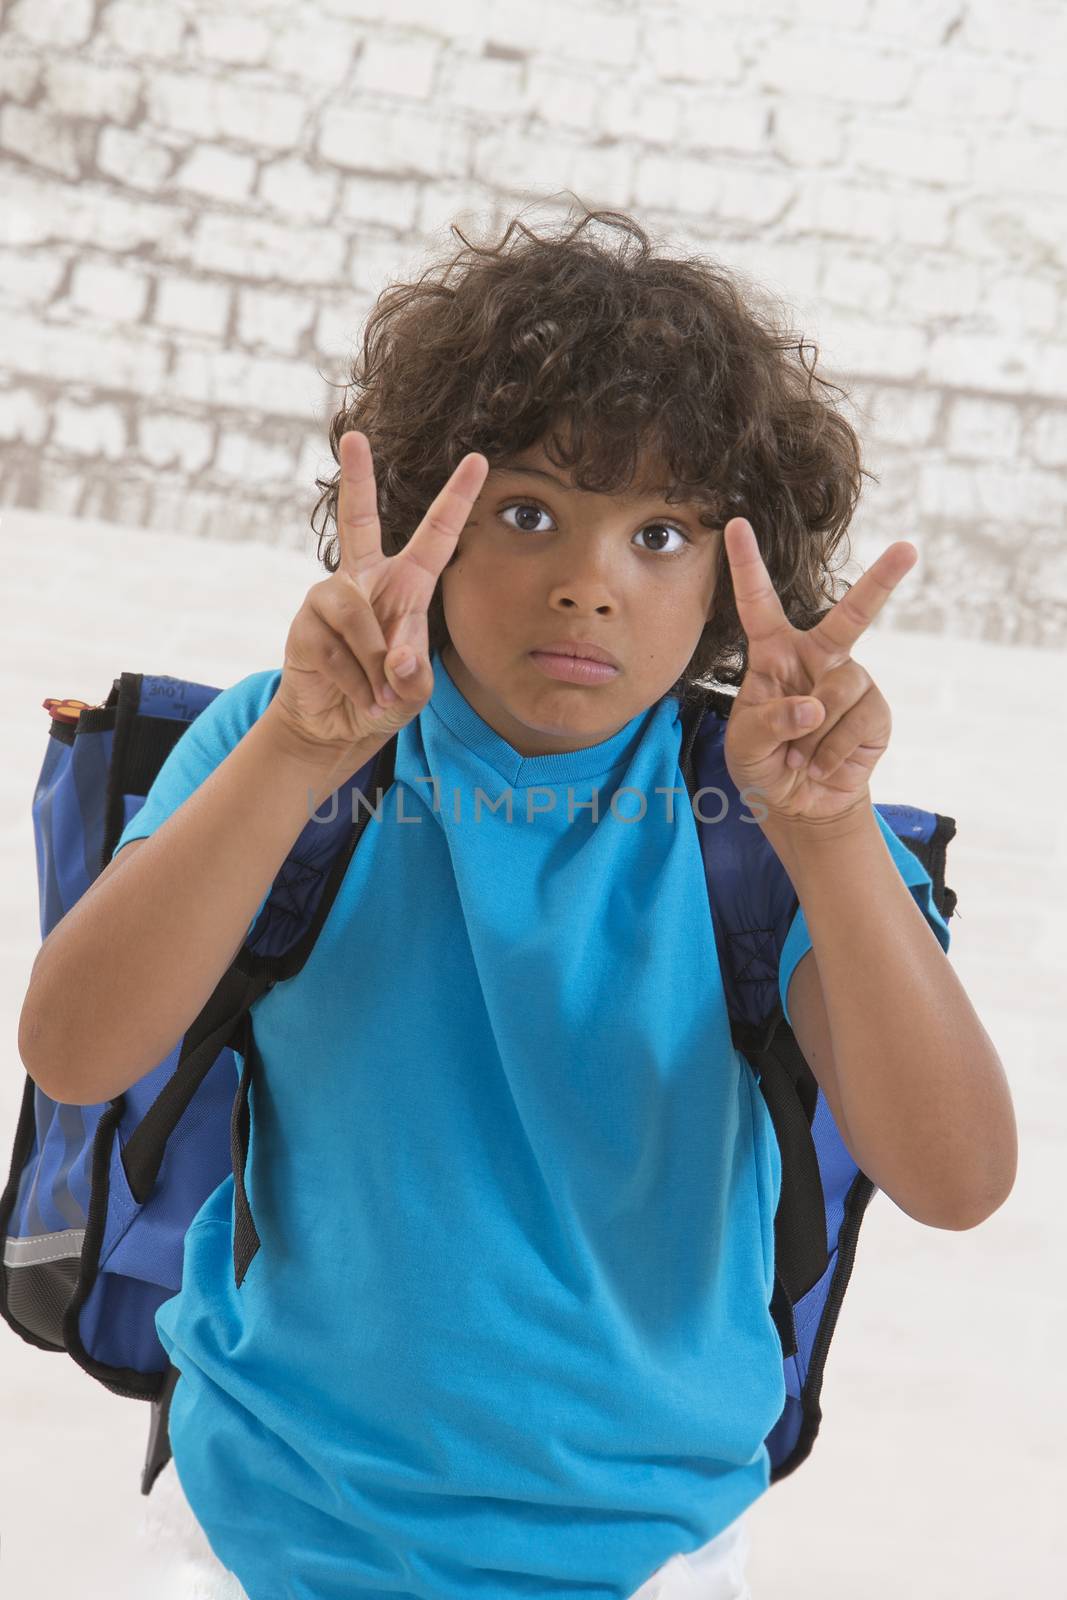 Adorable young kid ready for school with his bag by JPC-PROD